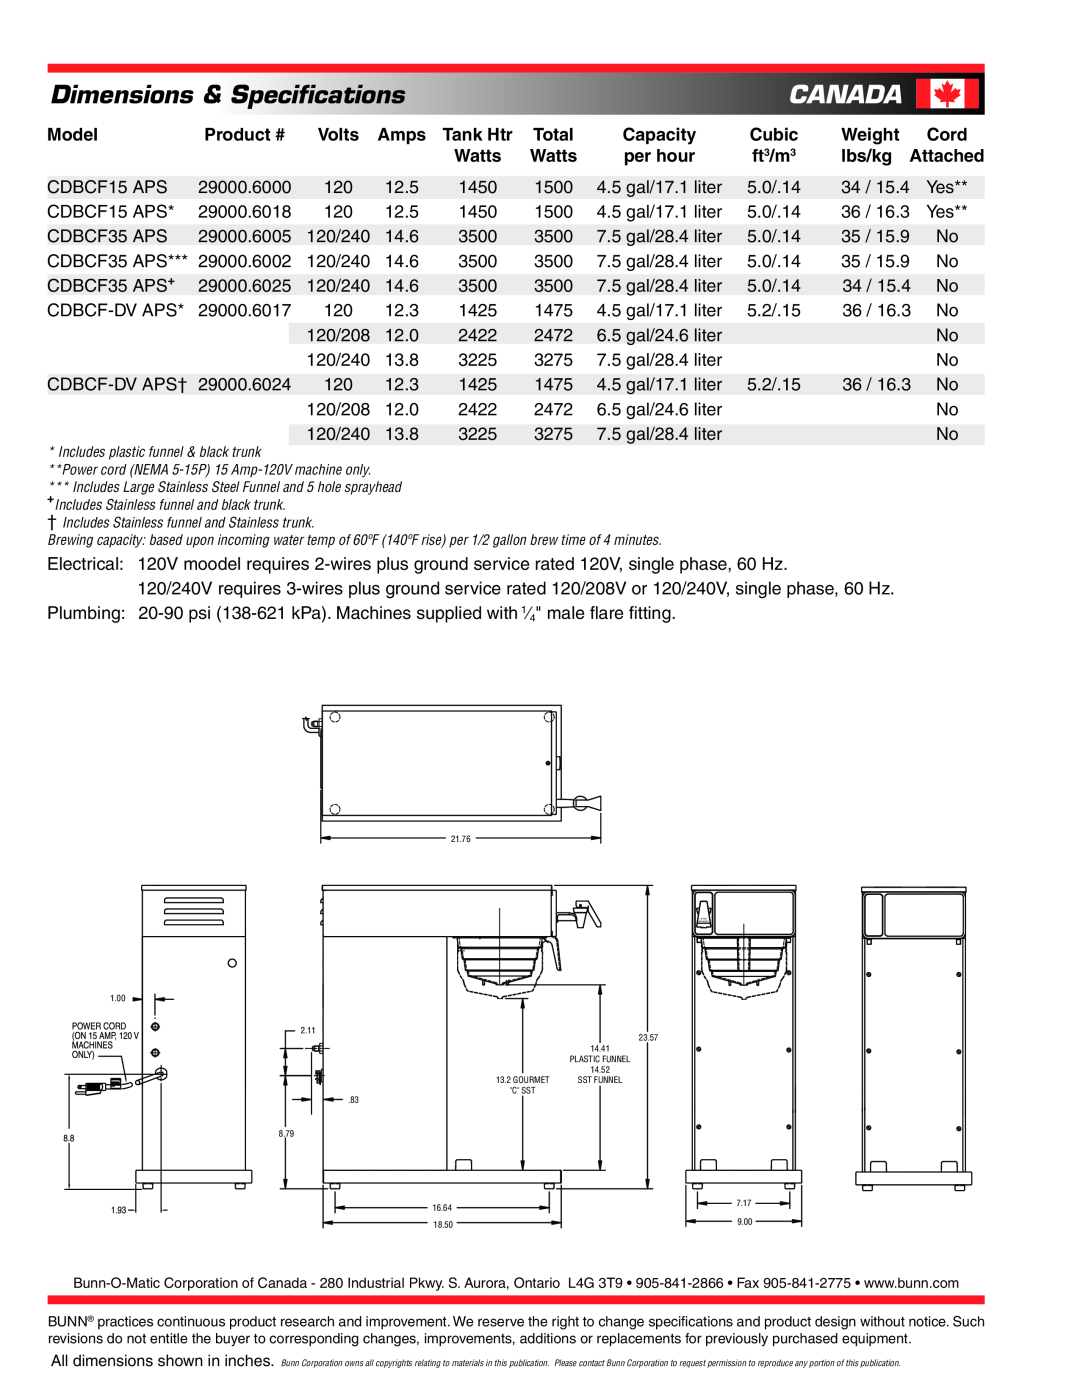 Bunn CDBCF- APS Canada, Dimensions & Specifications, Model, Product #, Volts, Amps, Tank Htr, Capacity, Cubic, Weight 